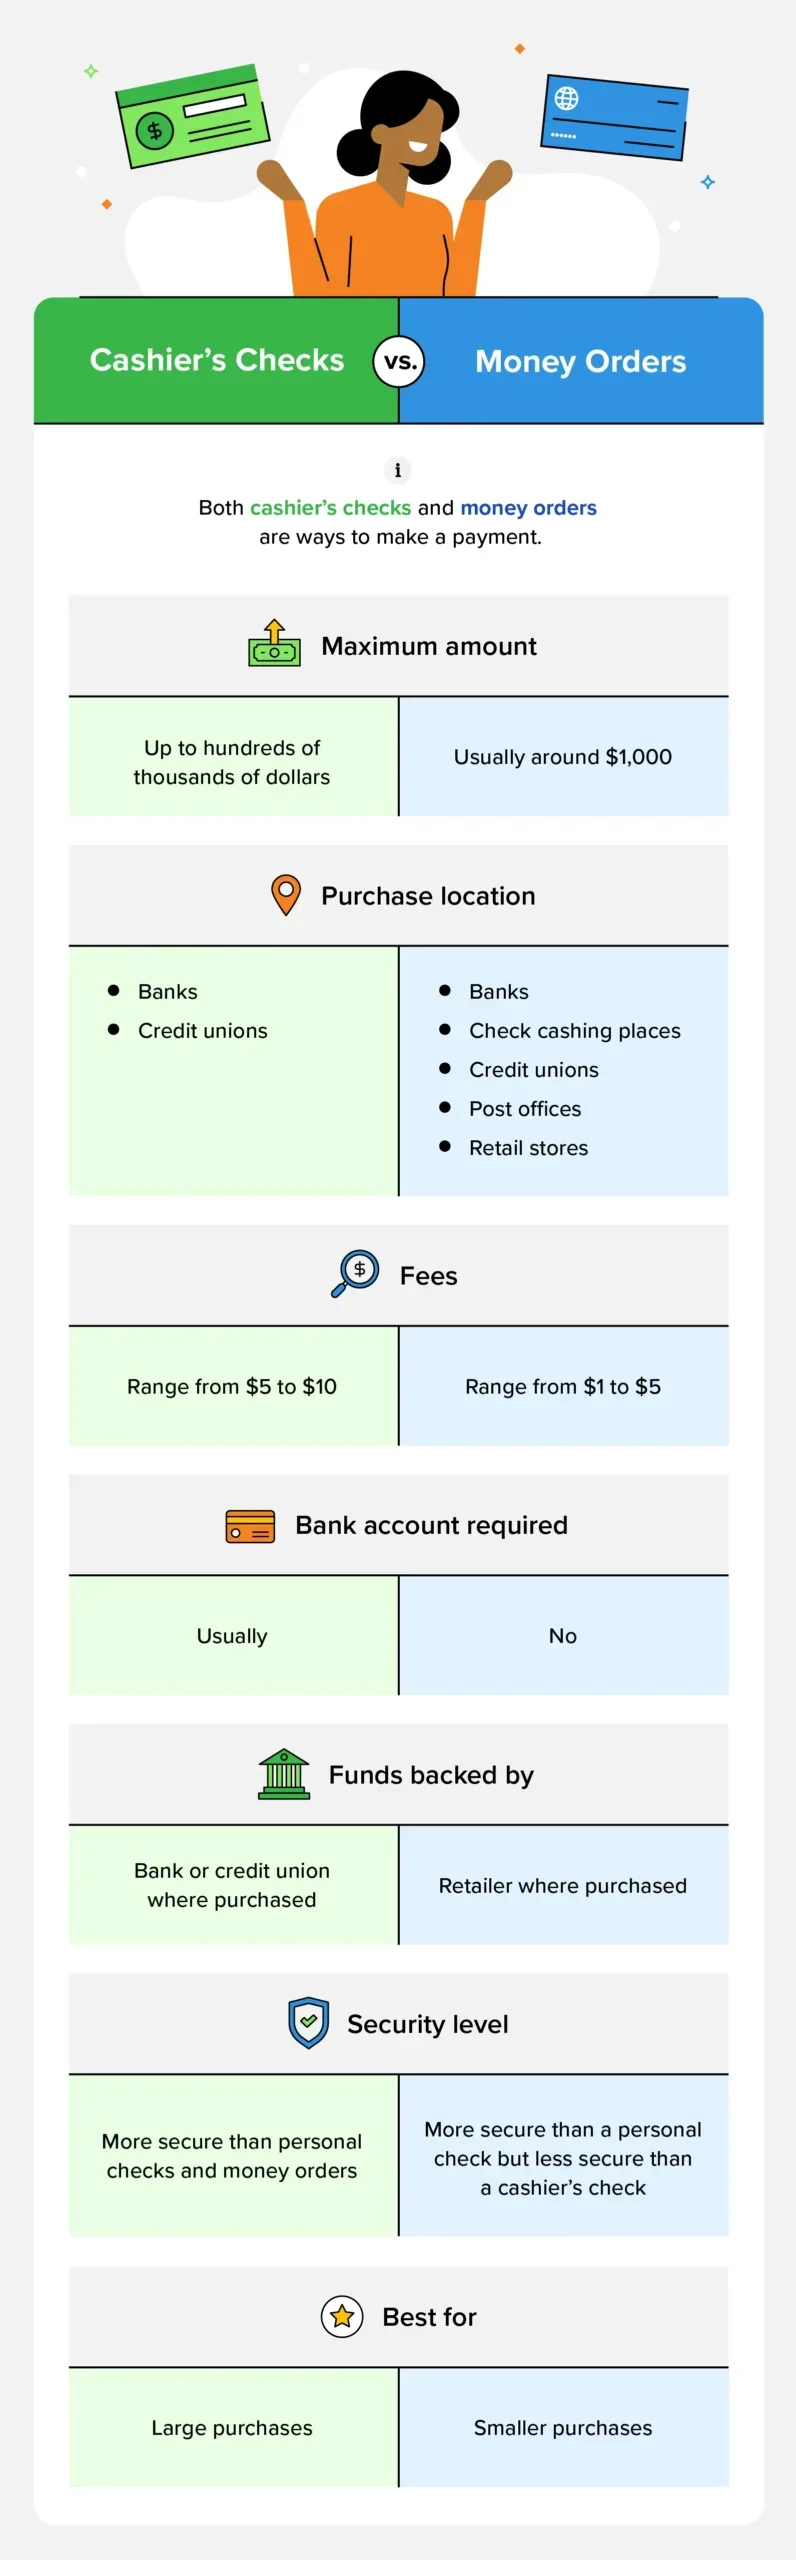 Differences between cashier’s checks and money orders.